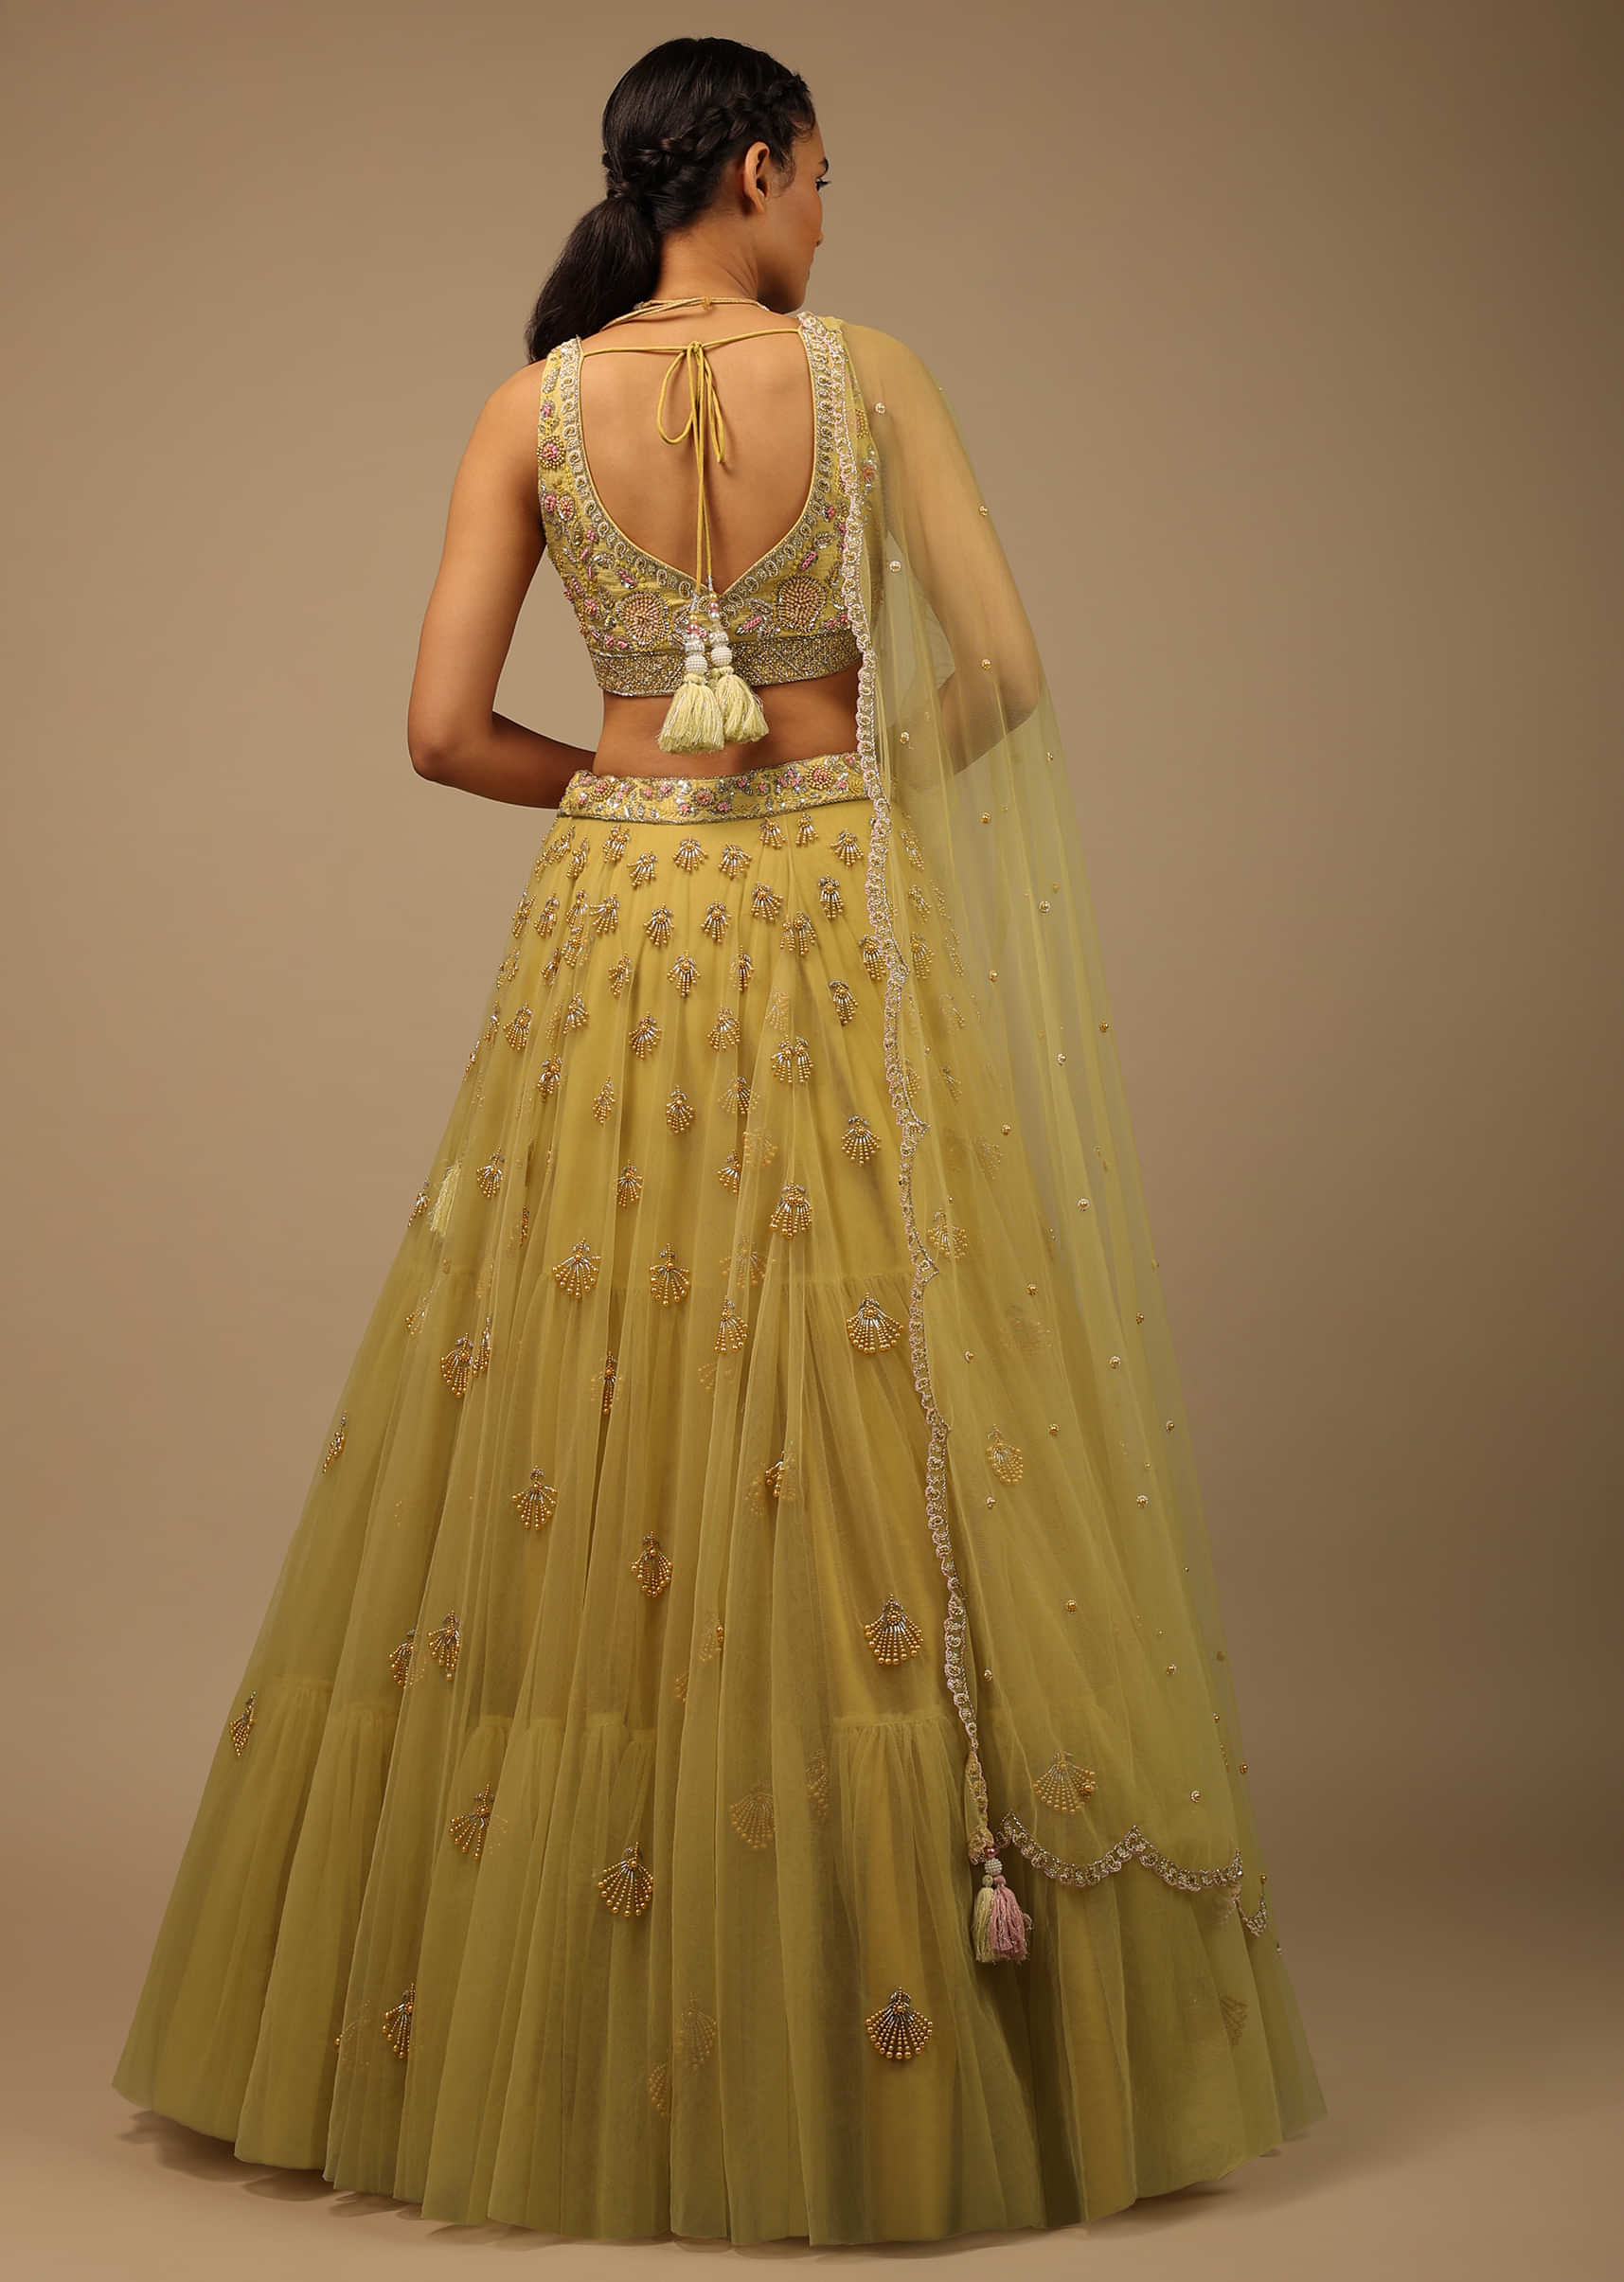 Pastel Yellow Lehenga Choli In Net With Multi Colored Beads And Sequins Embroidered Floral Motifs